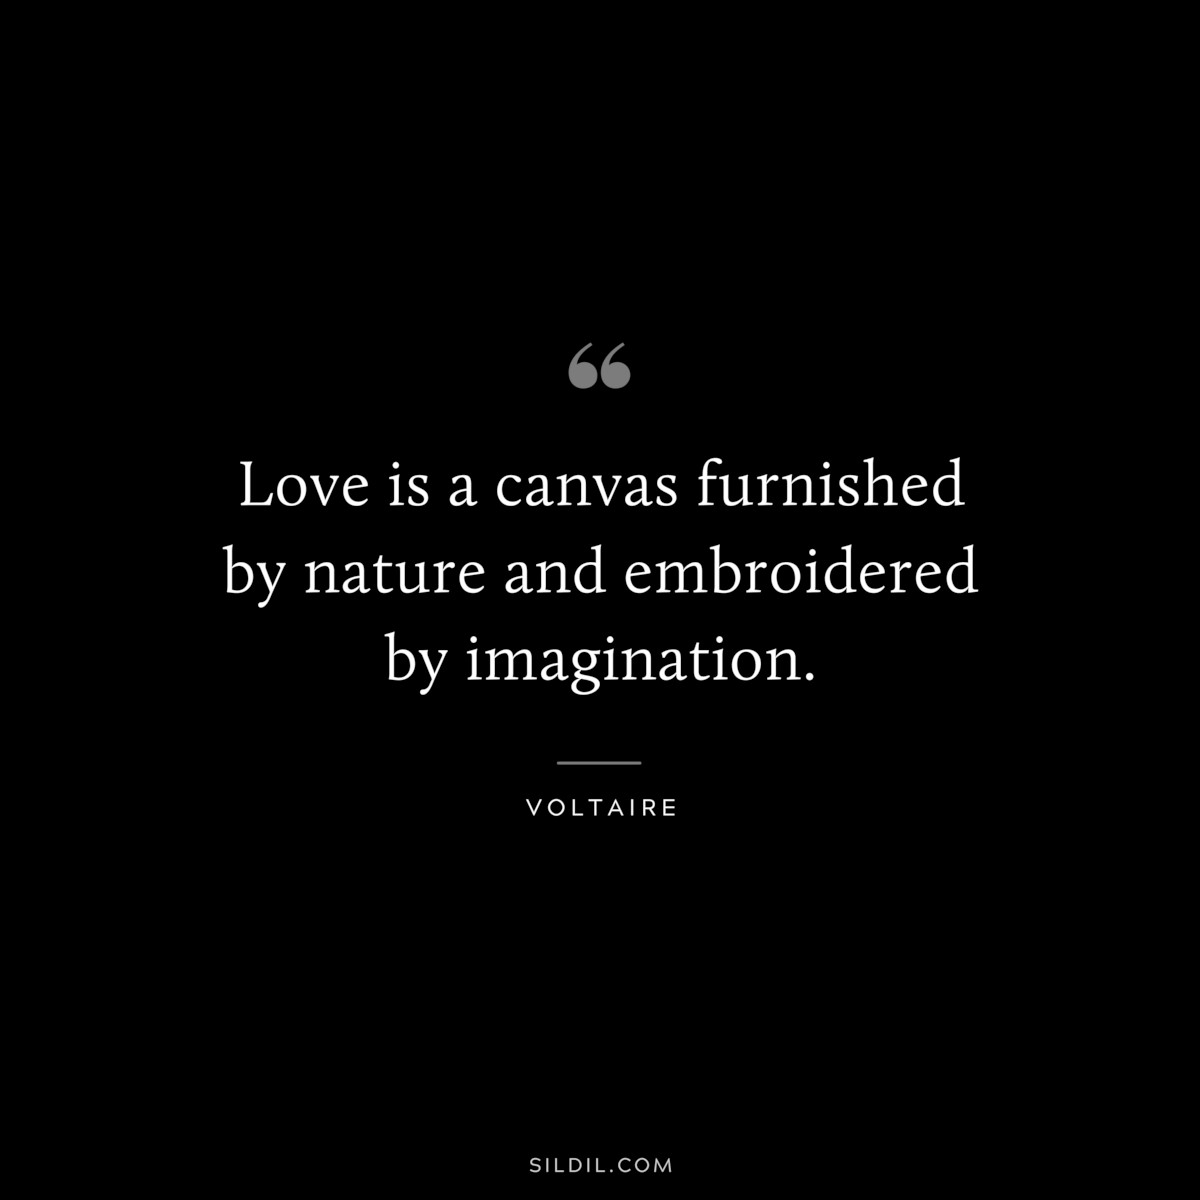 Love is a canvas furnished by nature and embroidered by imagination. ― Voltaire